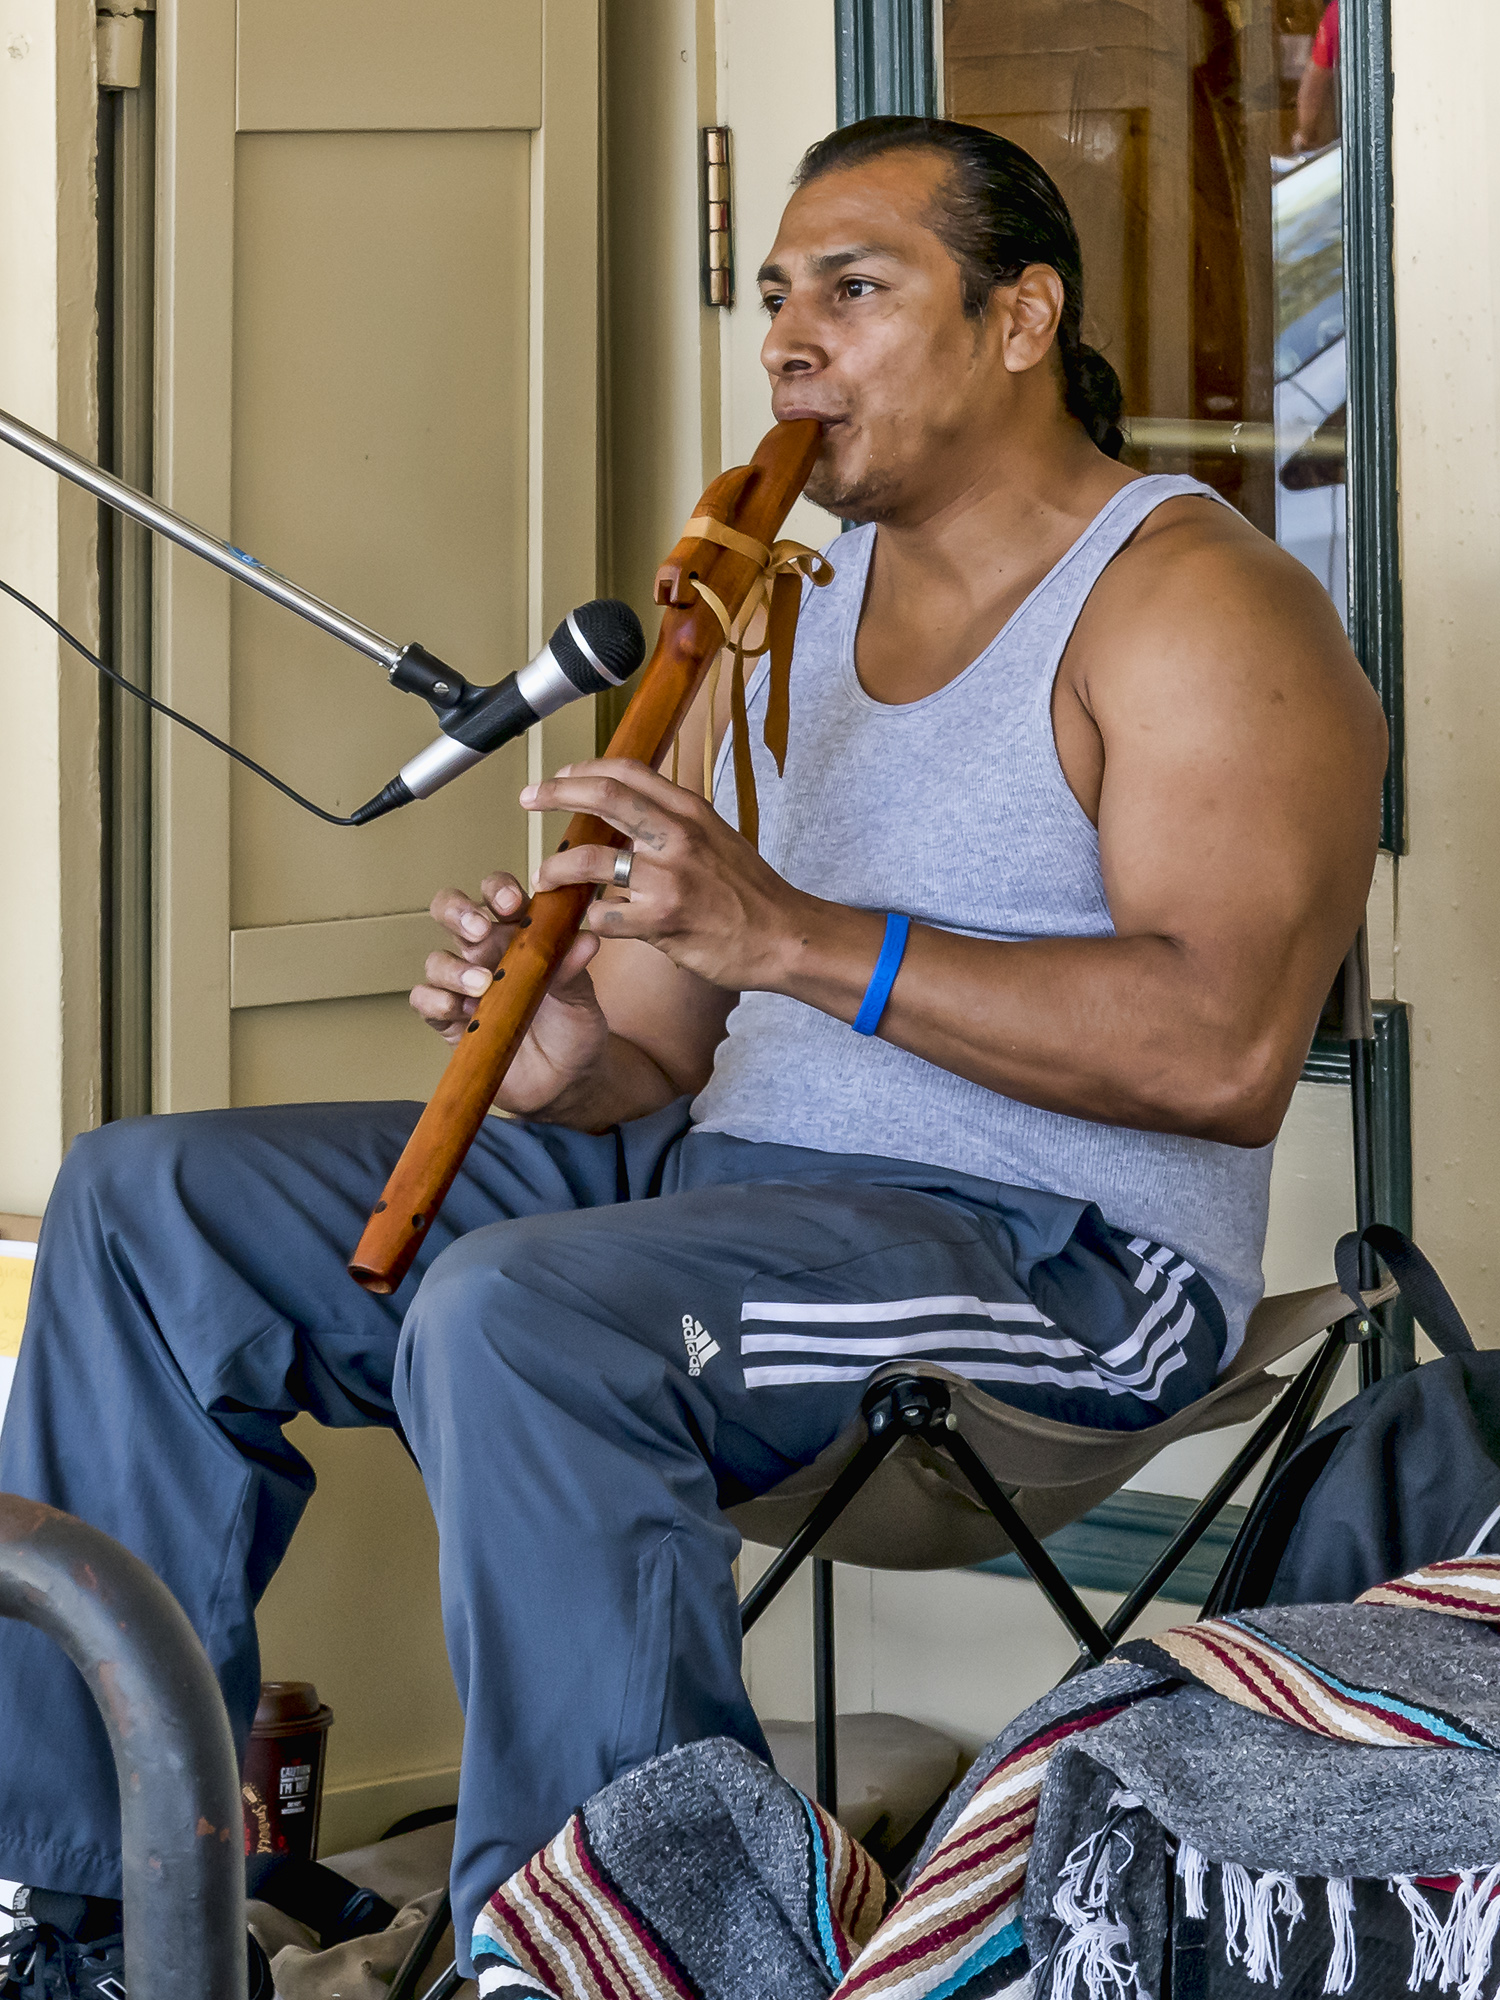 Old Town: The Flute Player